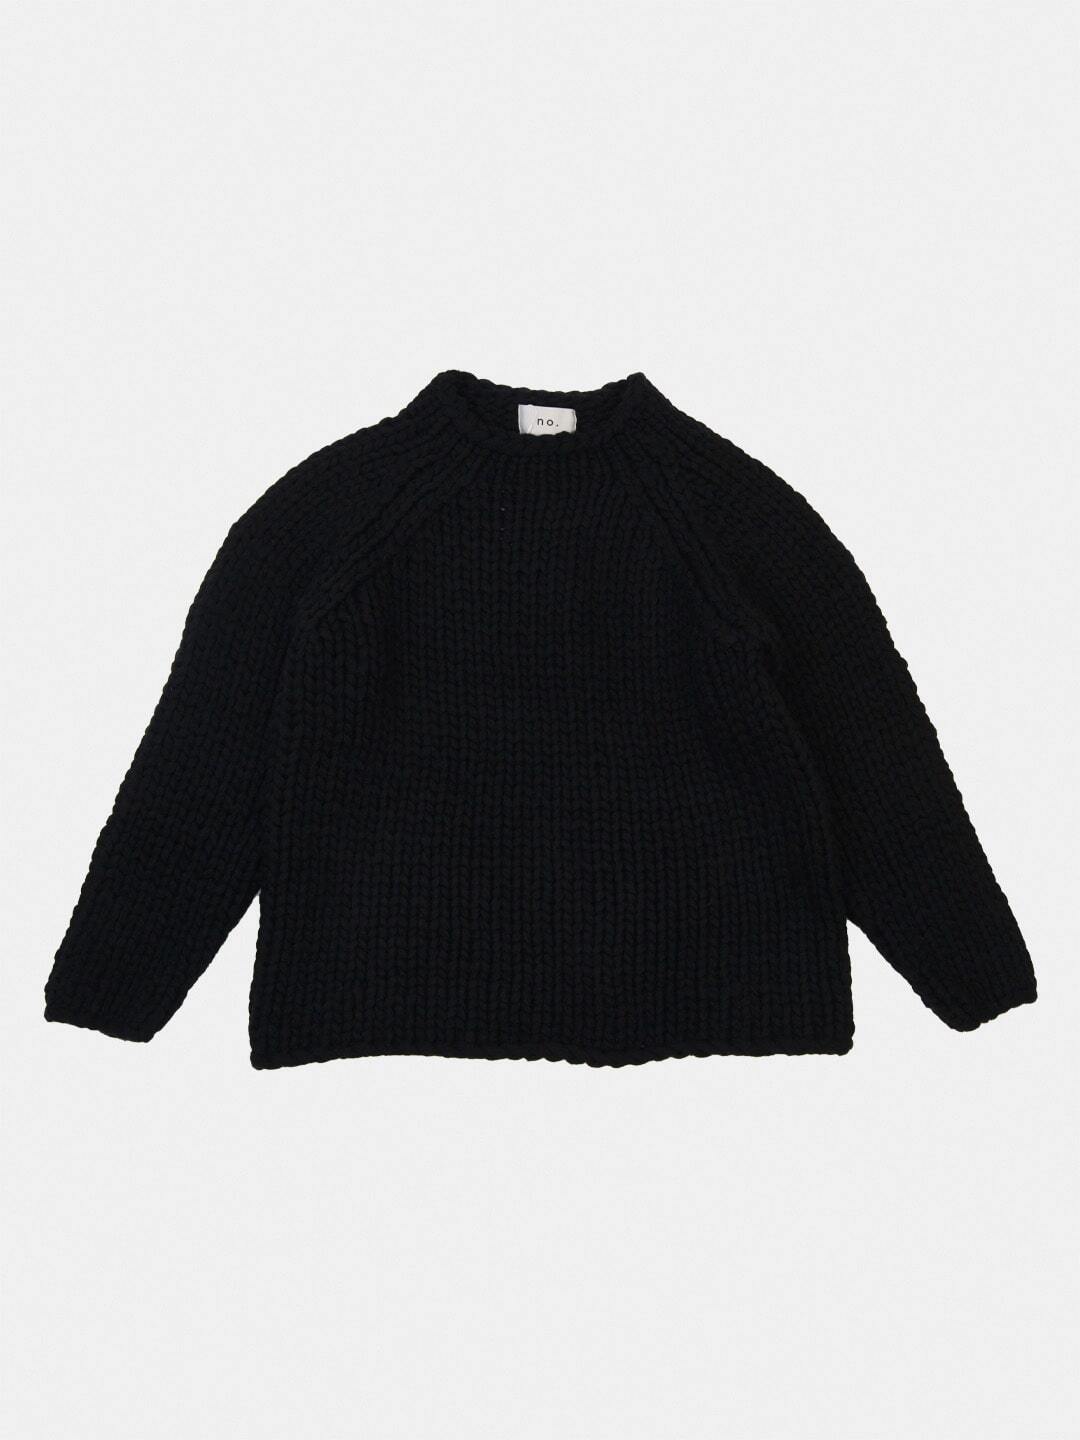 LIMITED THICK THREAD KNIT